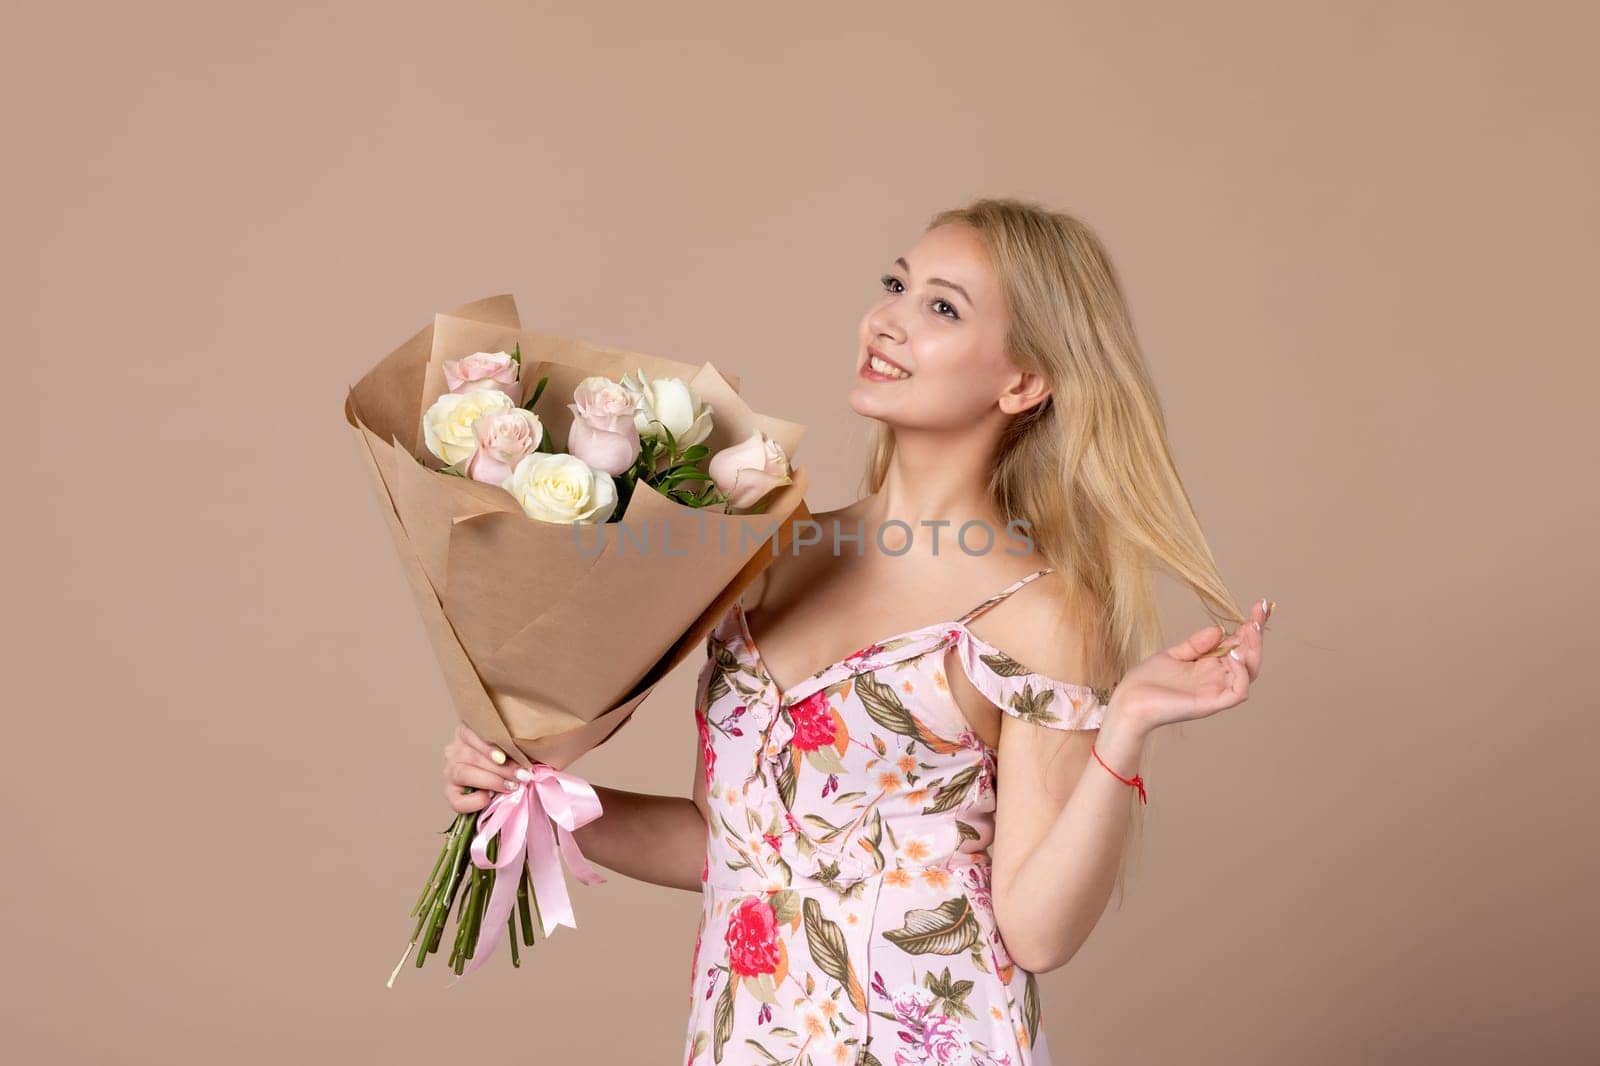 front view young female holding bouquet of beautiful roses on brown background sensual woman horizontal march gift marriage equality